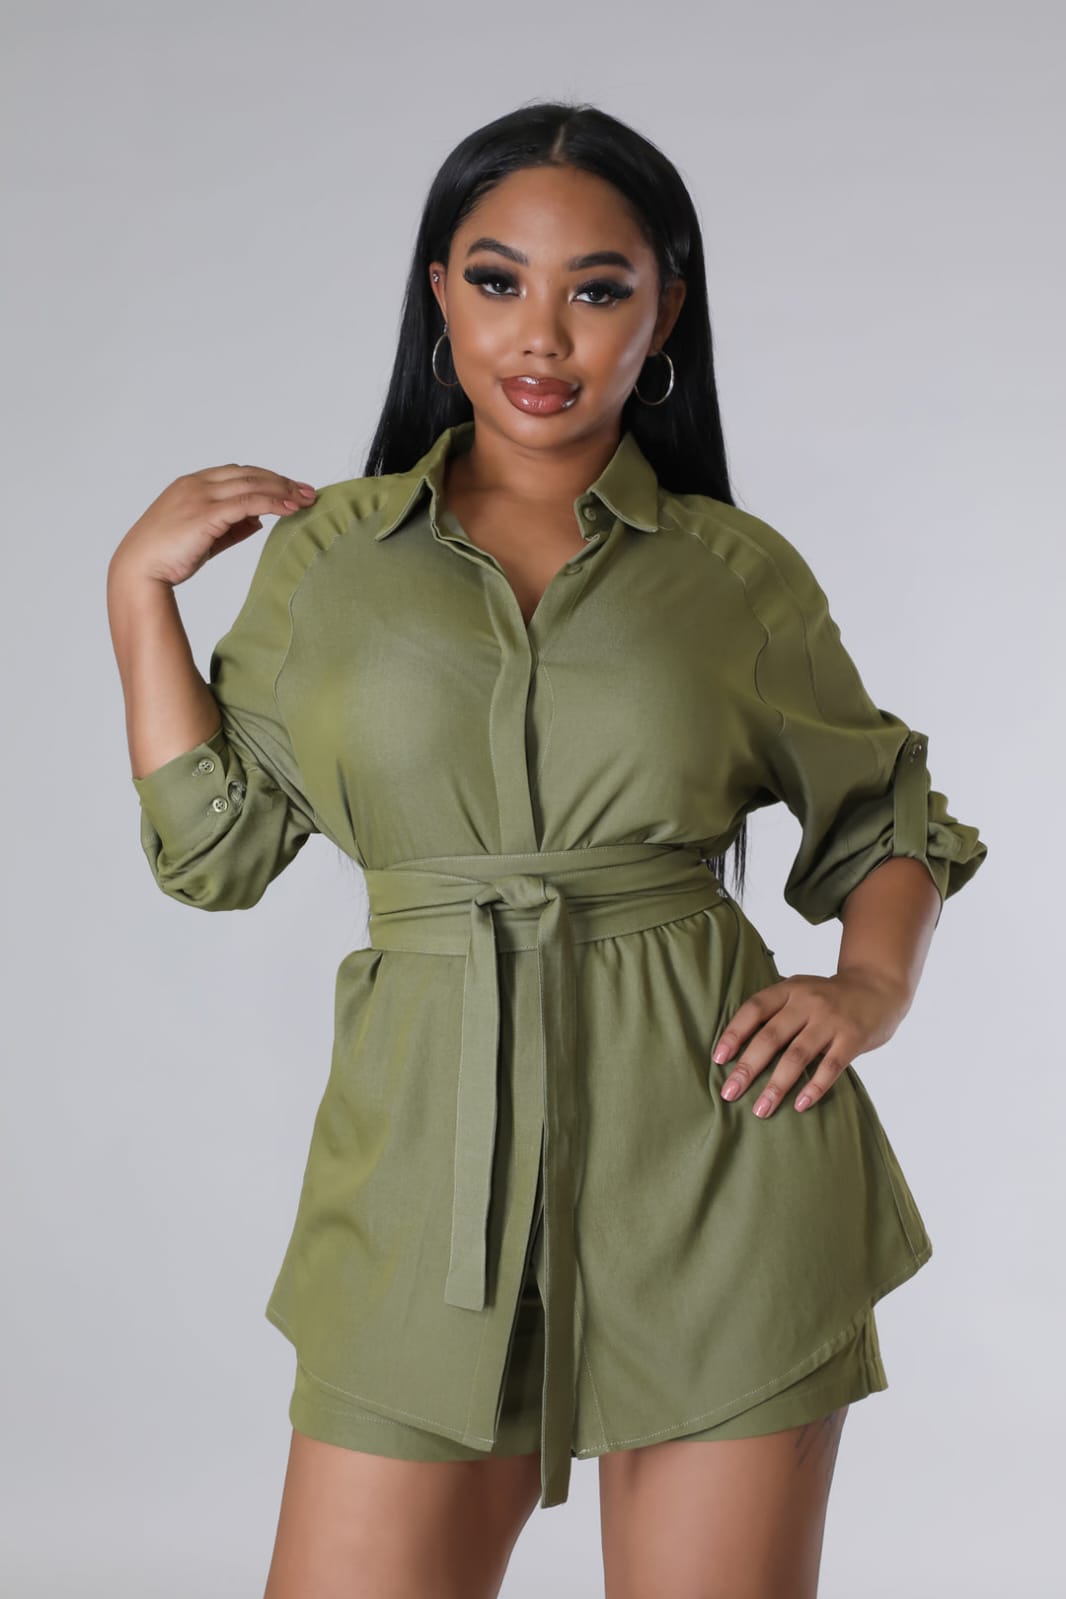 Ladies' Soft Fabric Mini Short and Buttoned Top Set